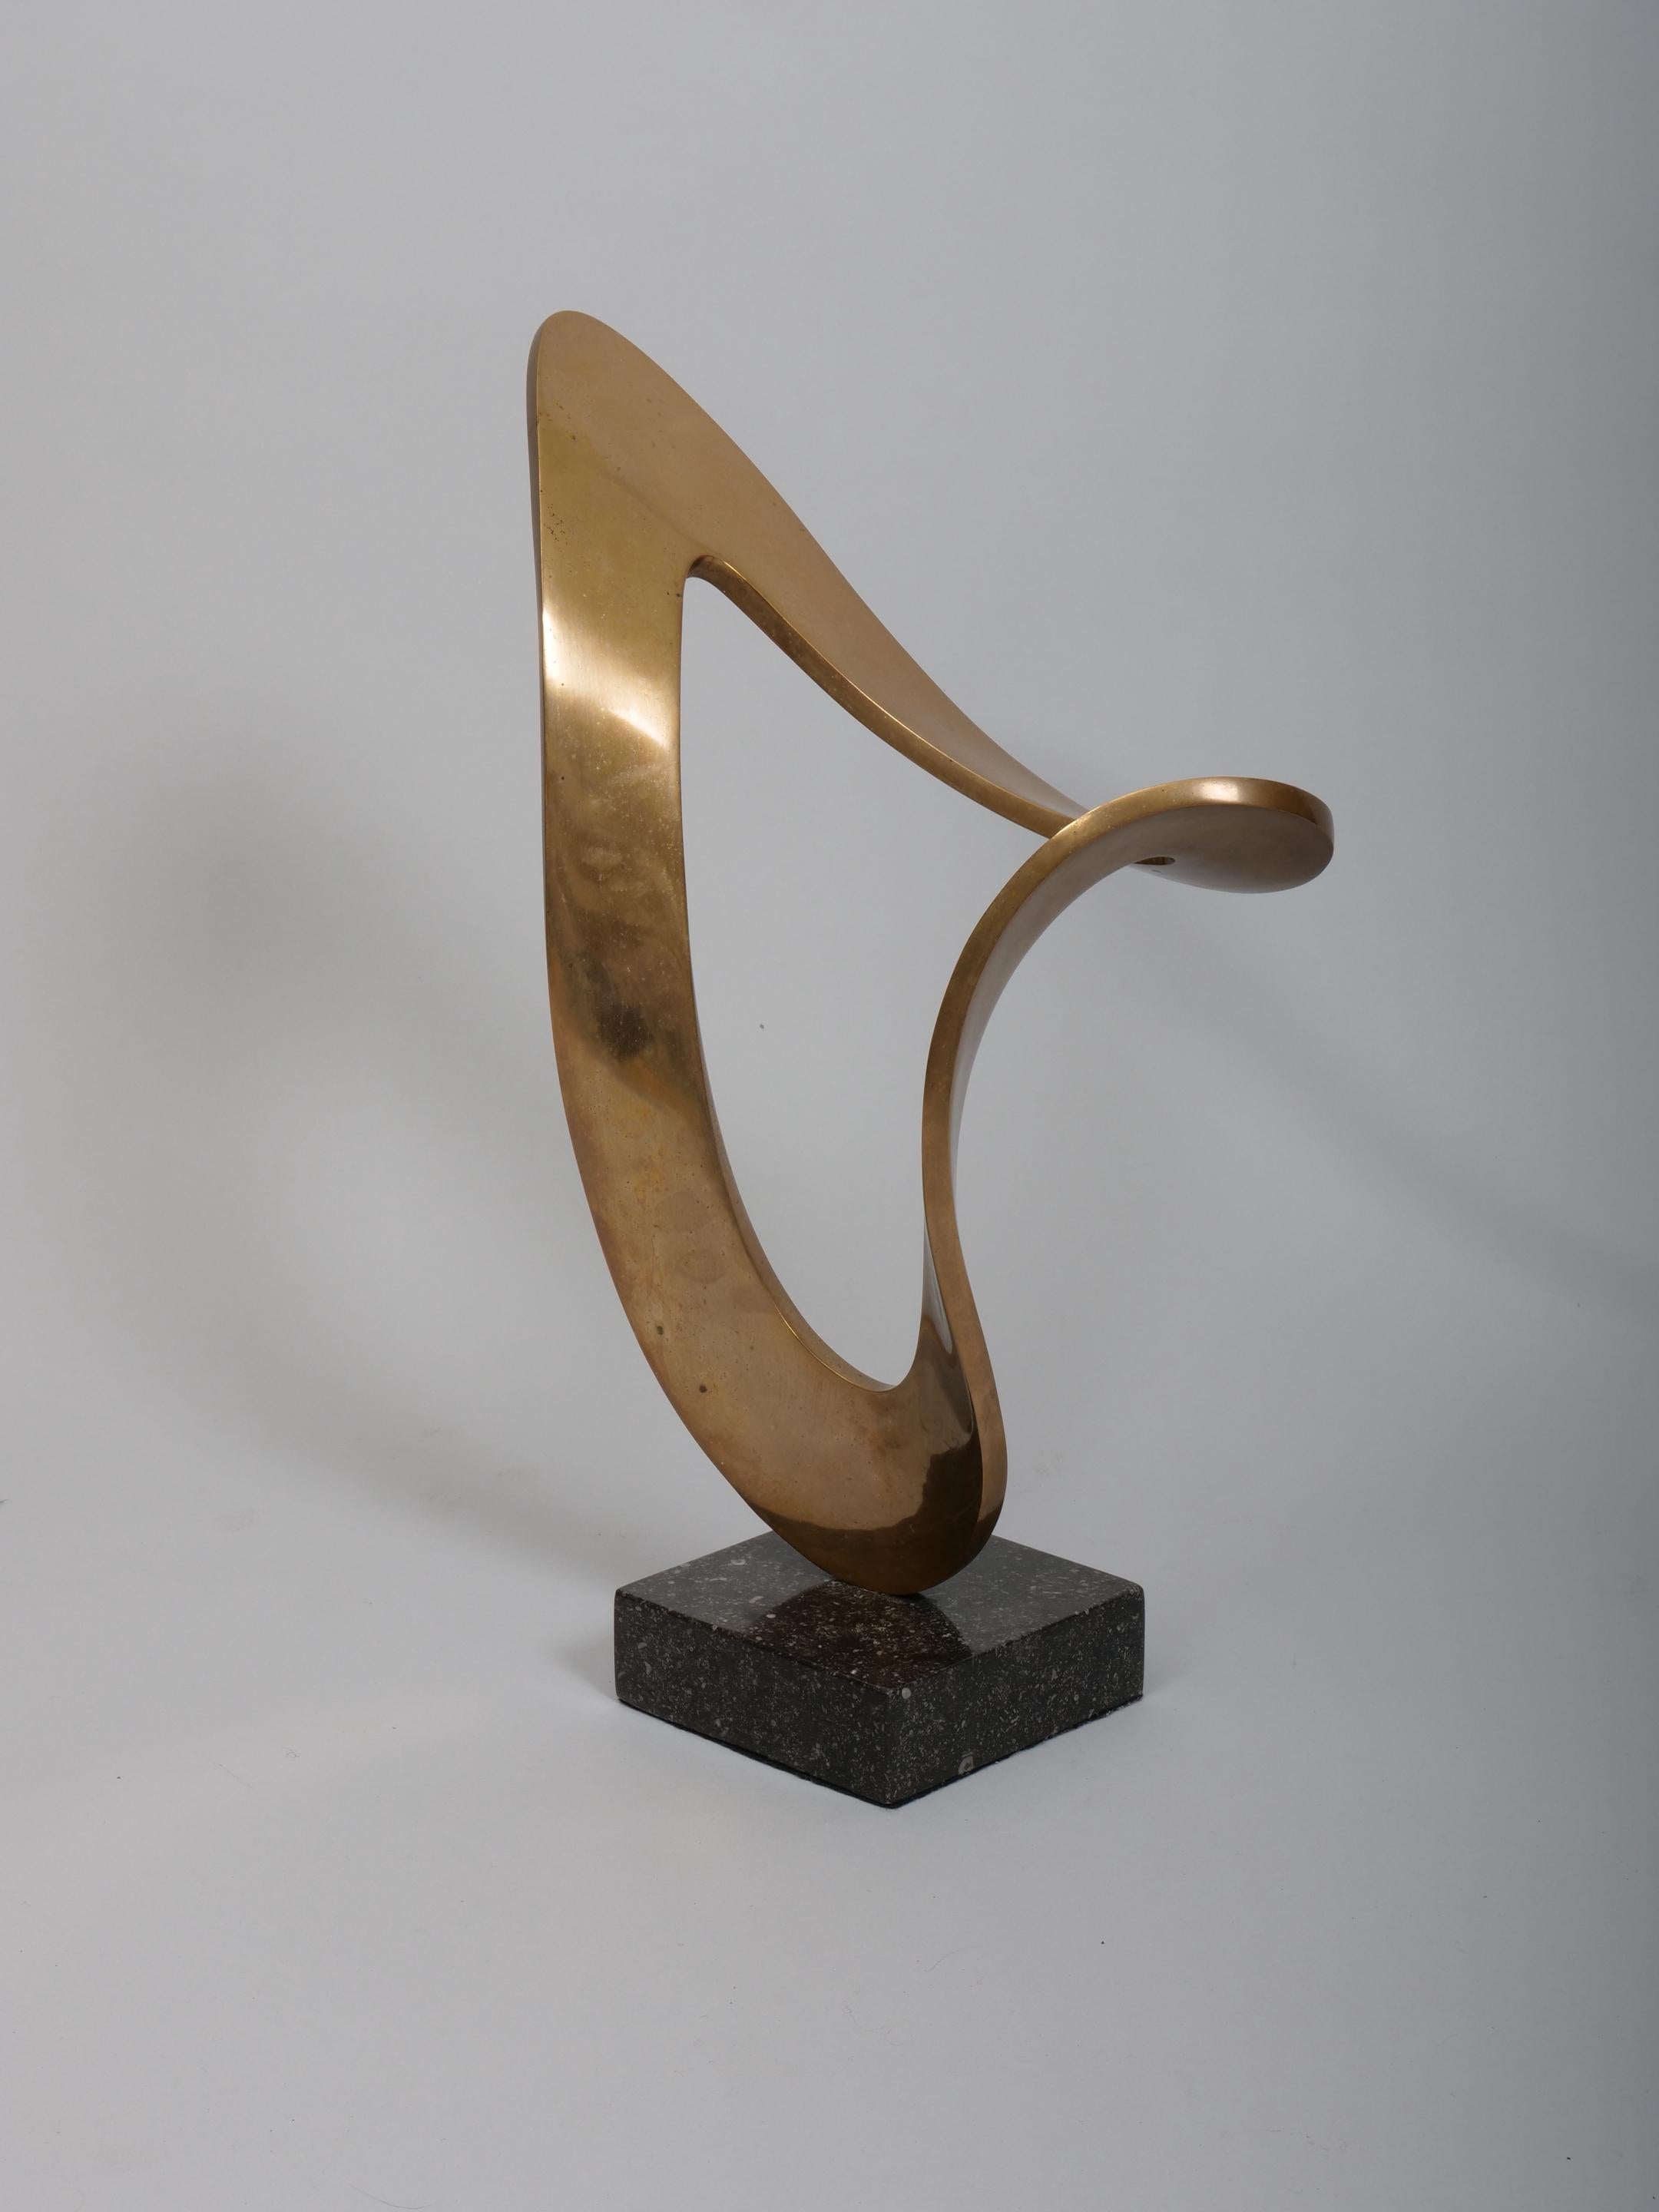 Modernist sculpture in brass with marble base